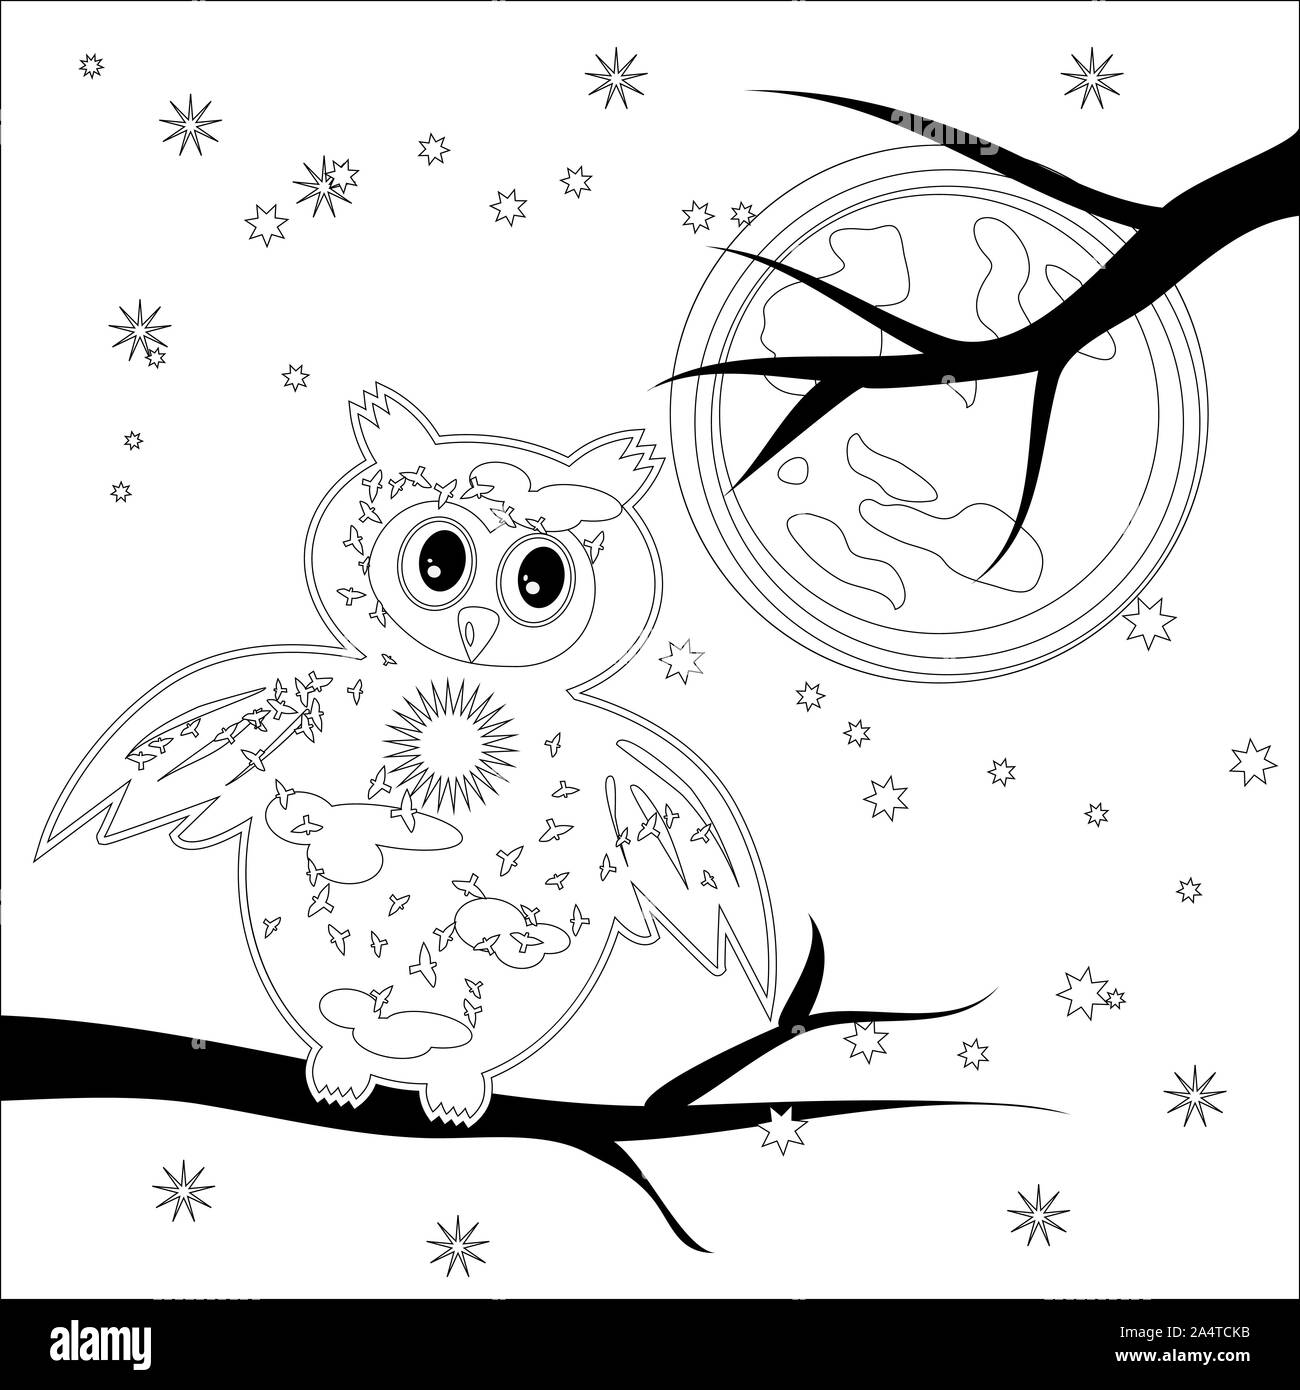 Coloring book for adult and older children. Coloring page with cute owl ...